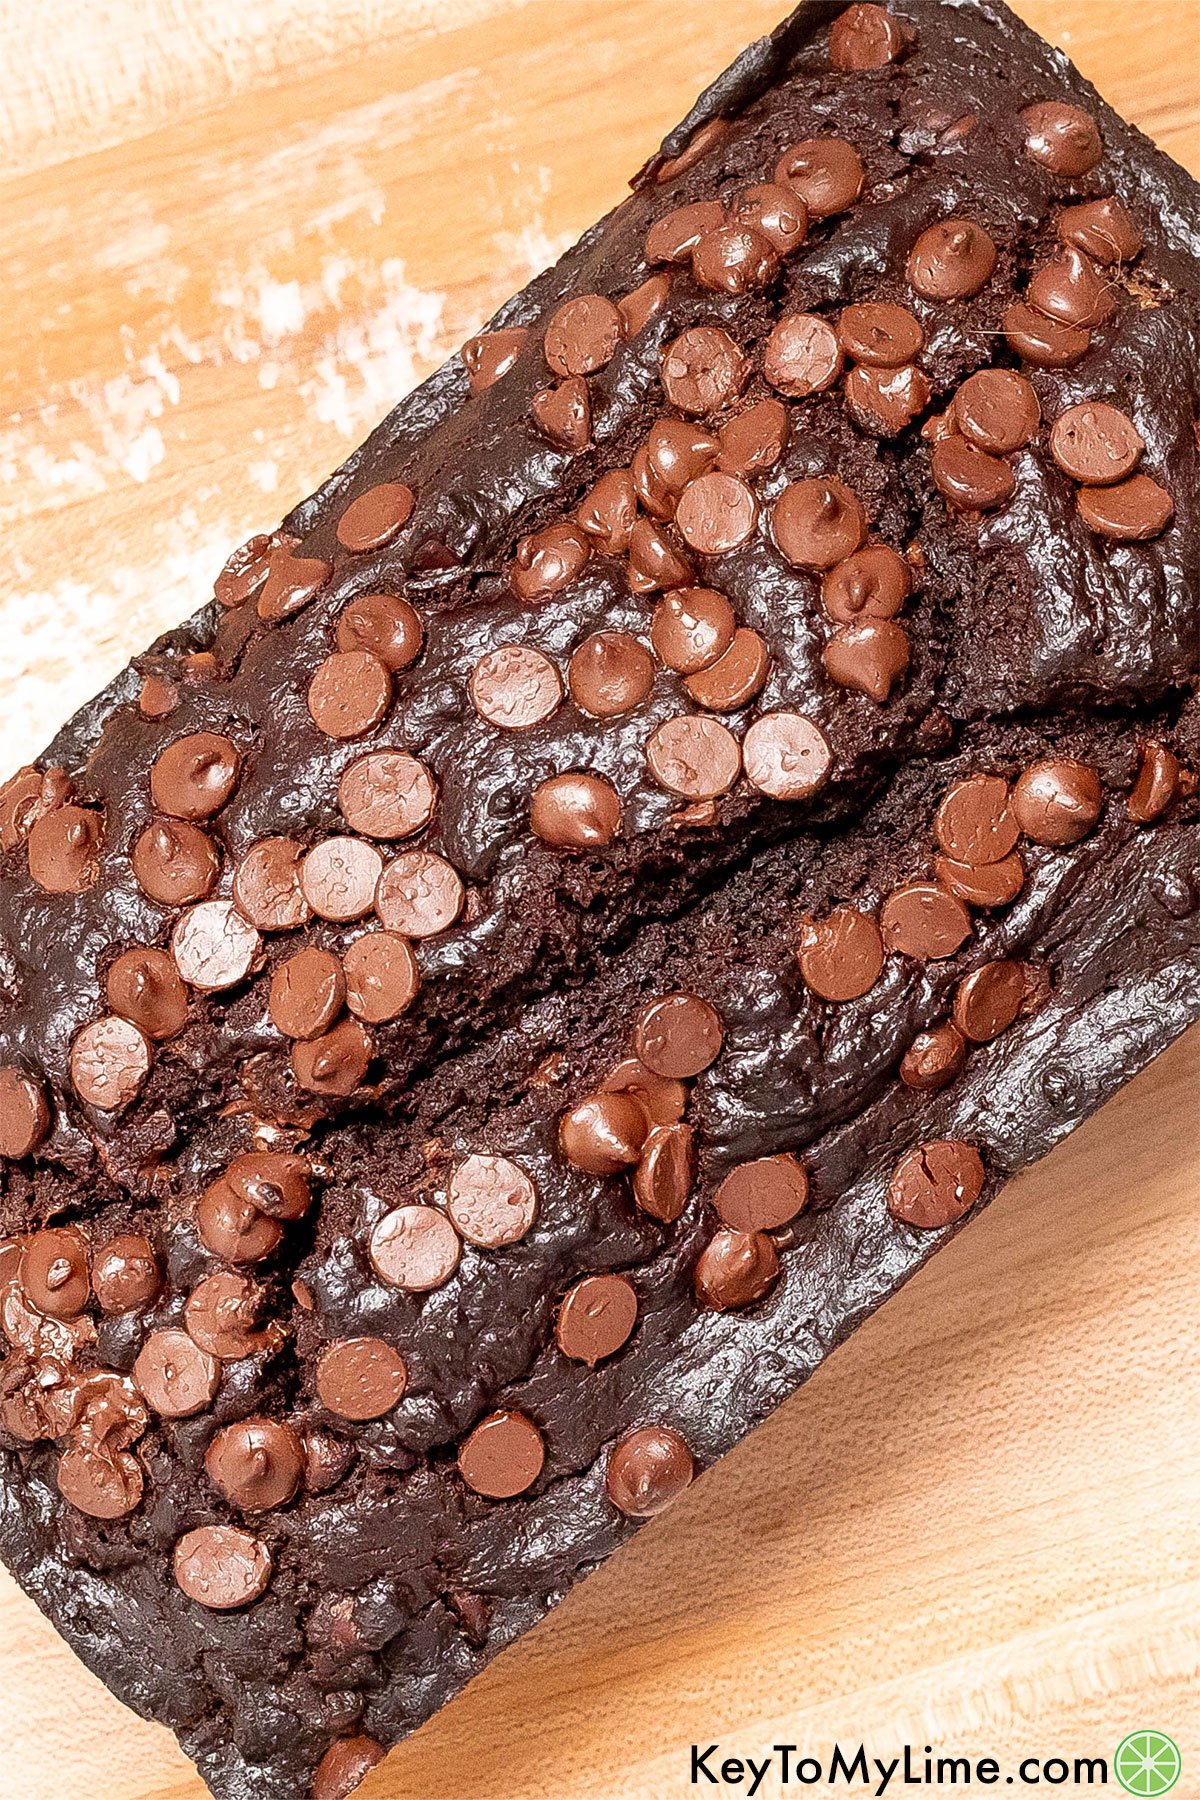 Gooey chocolate chips glistening on top of a chocolate loaf cake.